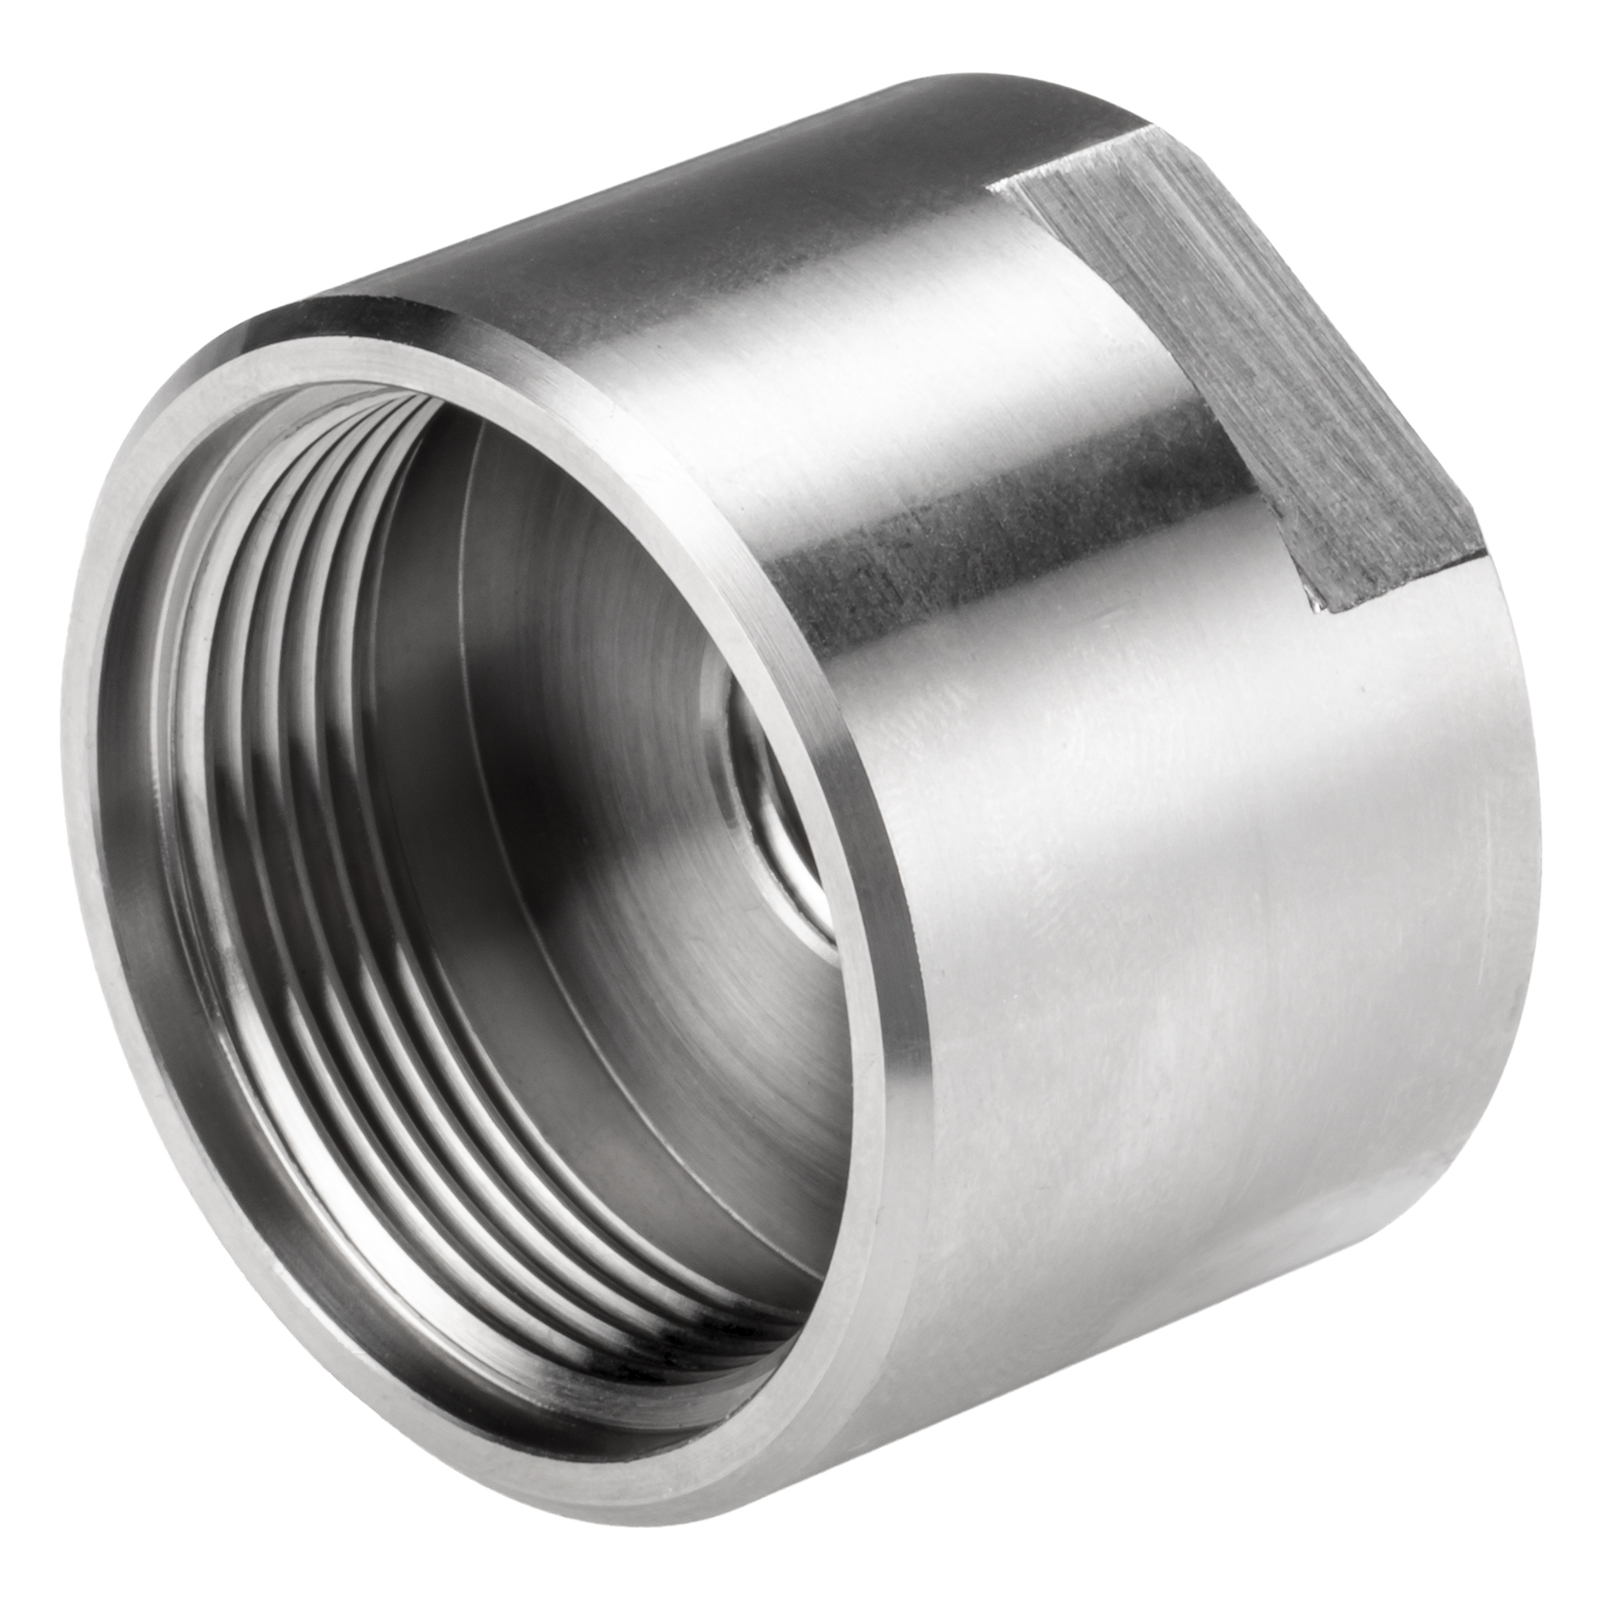 End Cap, Stainless Steel